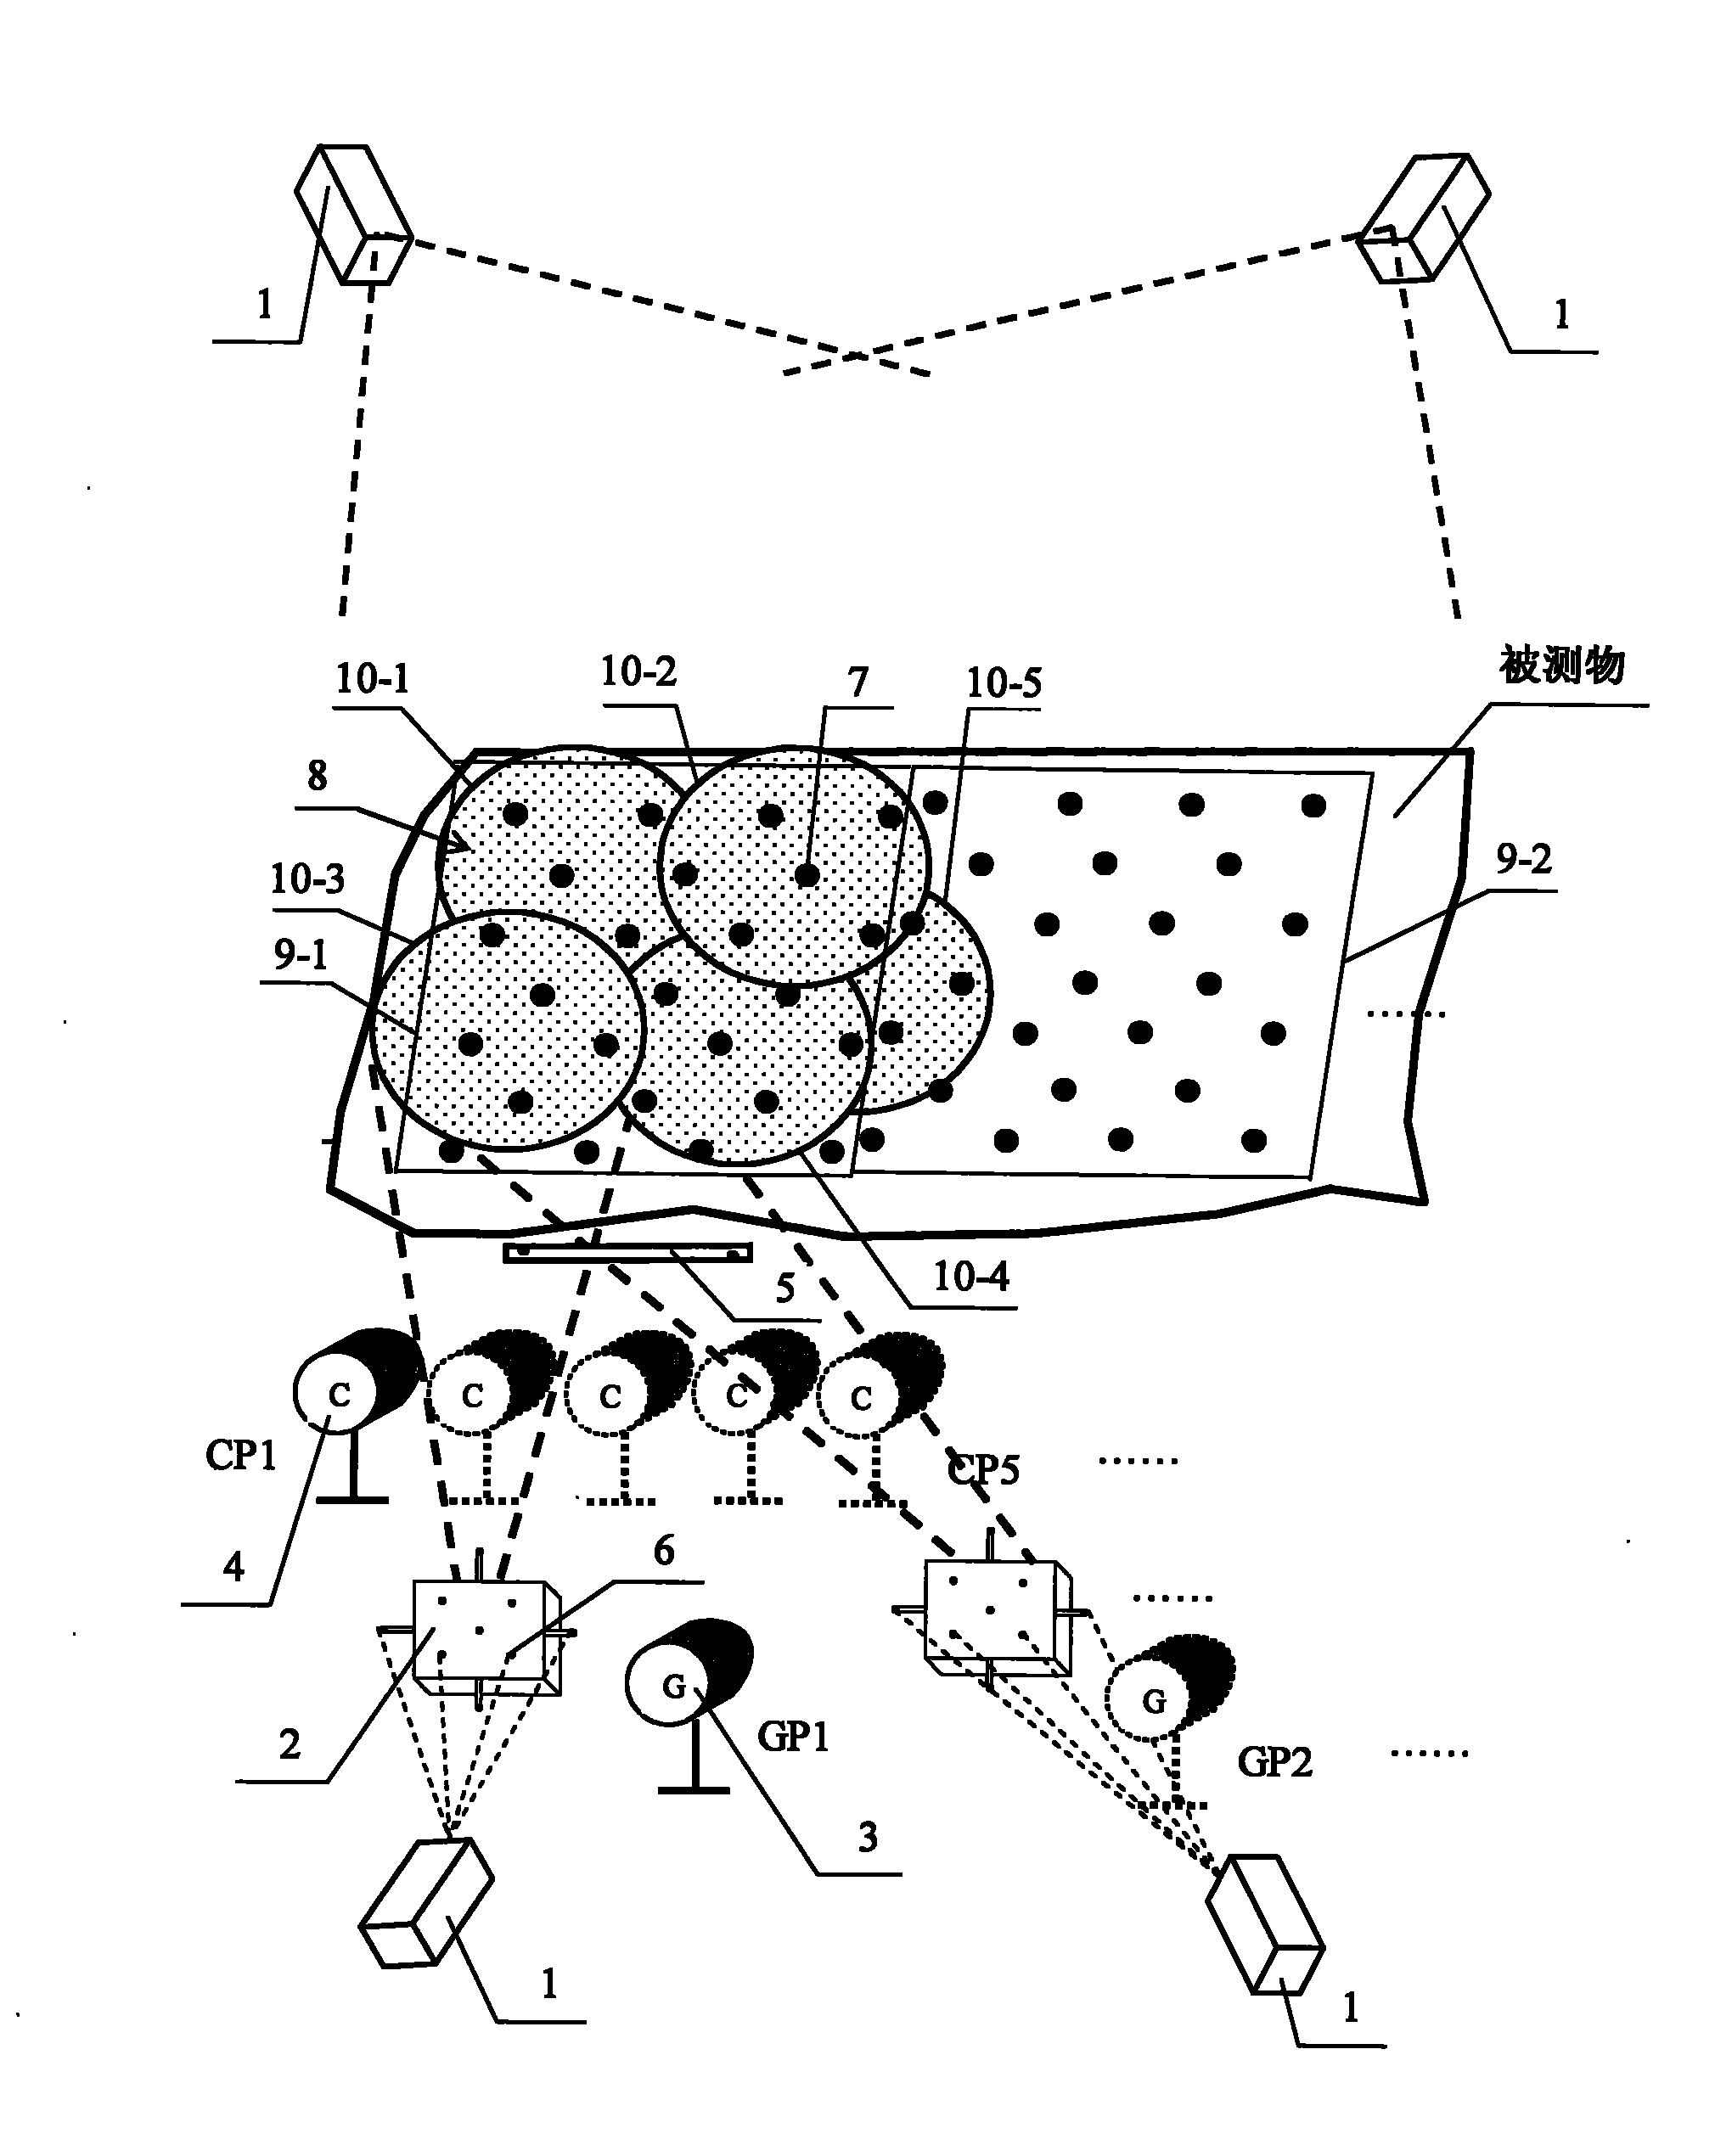 Absolute non-interfering precision measuring method facing ultra-large spatial complex curved surface